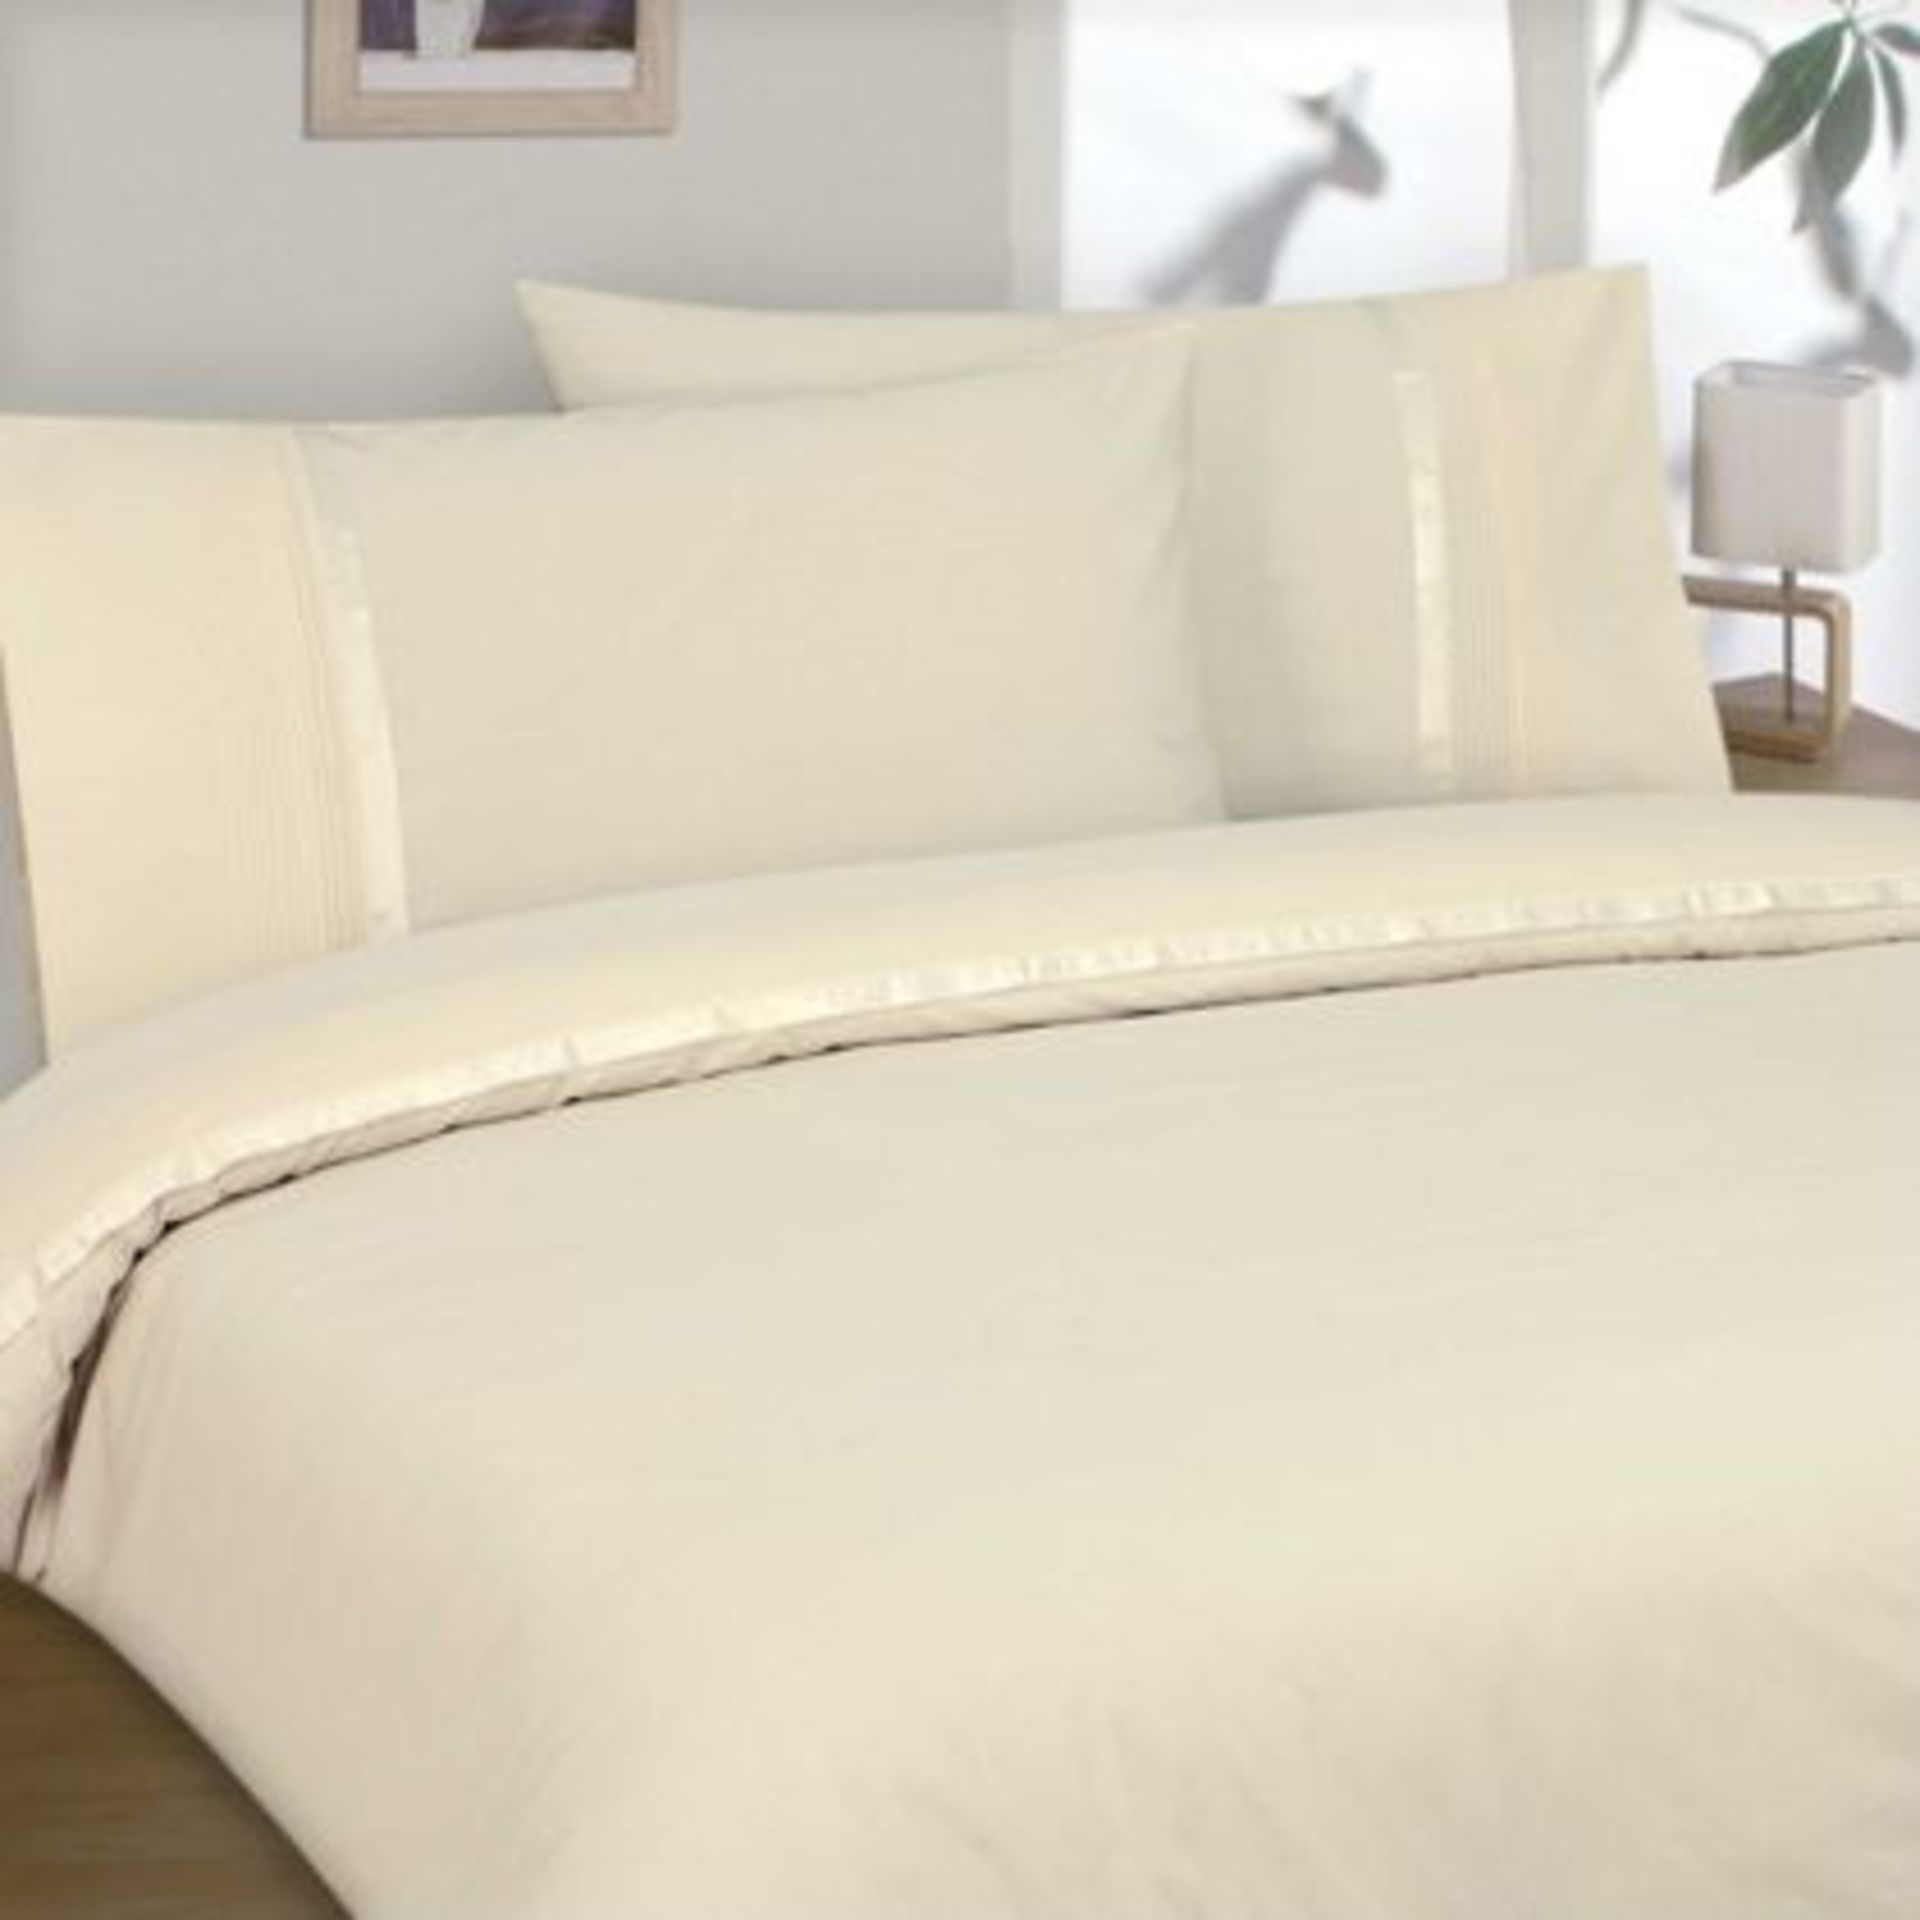 V Embroidered Four Piece Double Duvet Set - Cream RRP £59.99